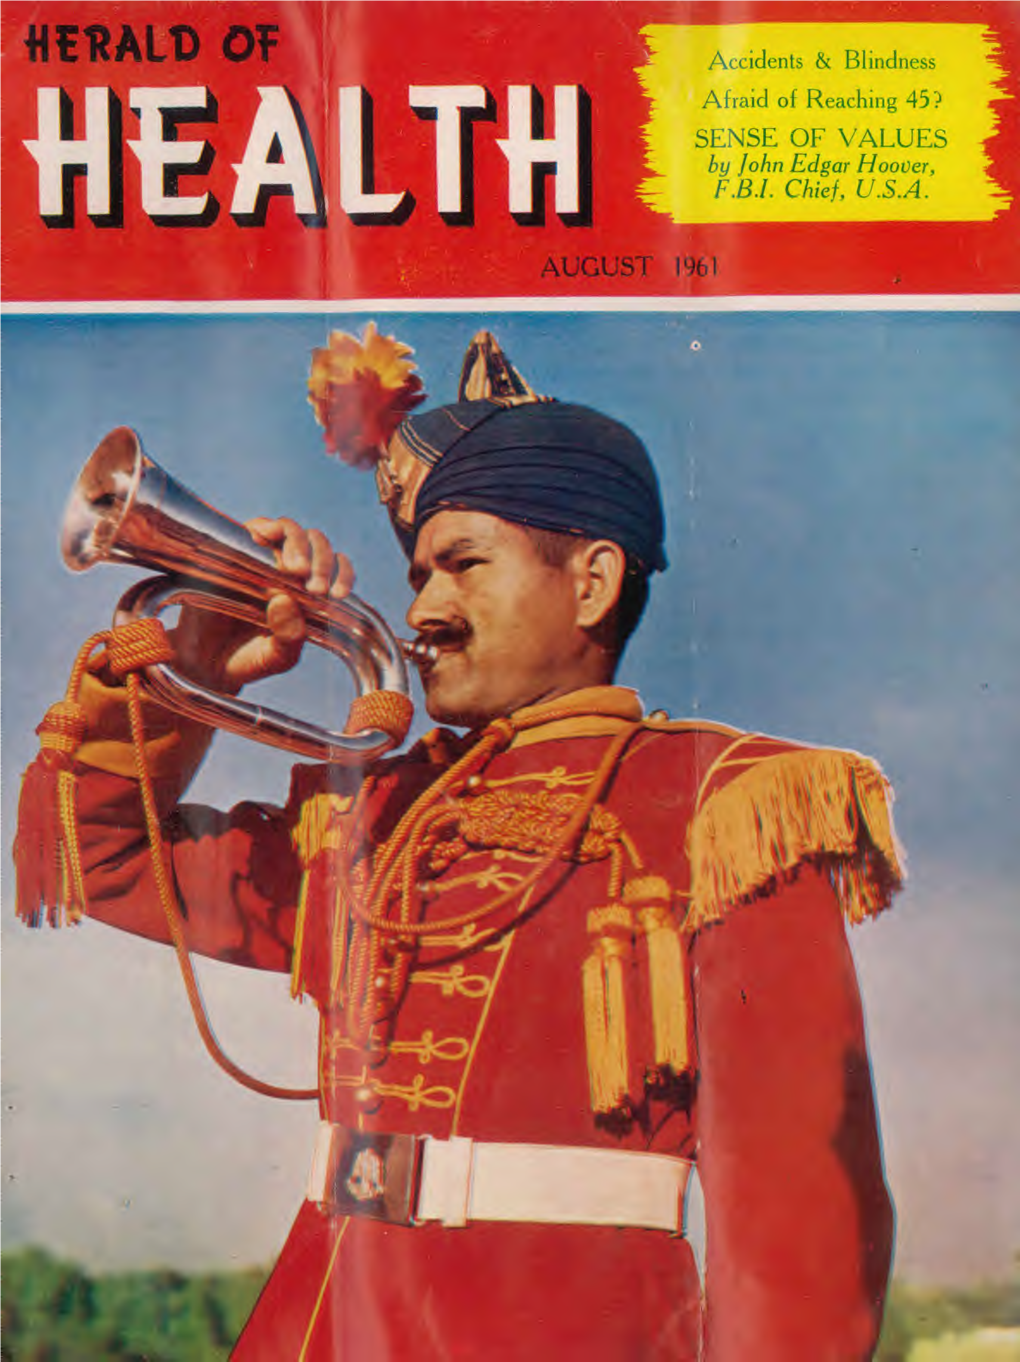 The Oriental Watchman and Herald of Health for 1961